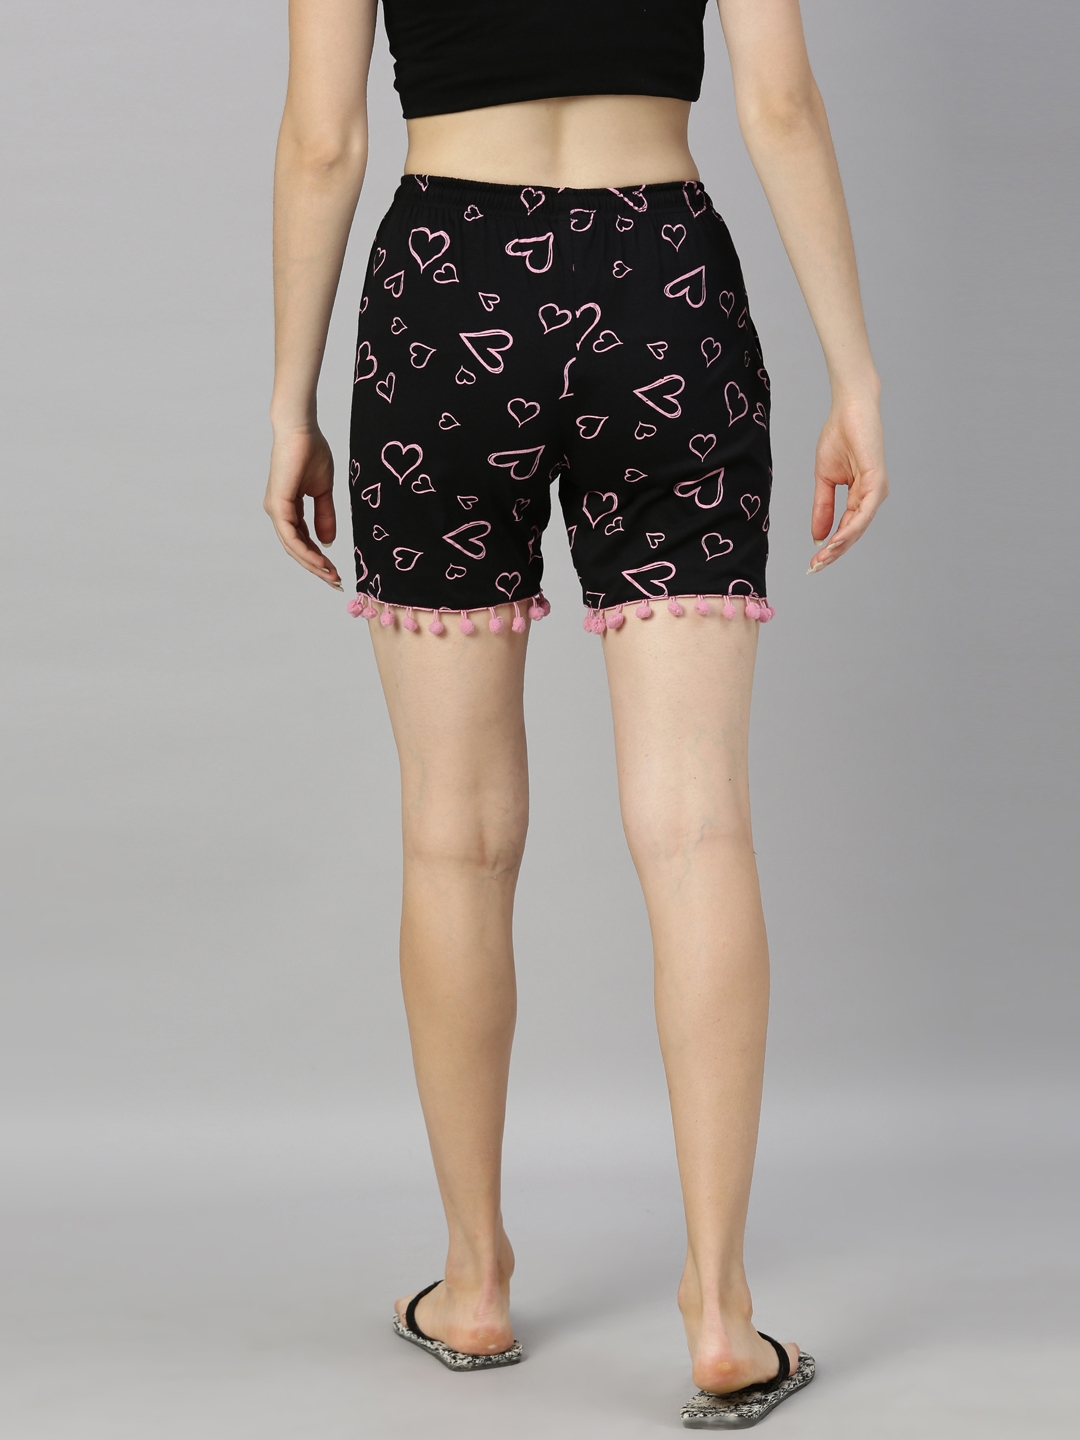 Kryptic | Kryptic Women's 100% Cotton Printed Shorts - Pack of 2 3